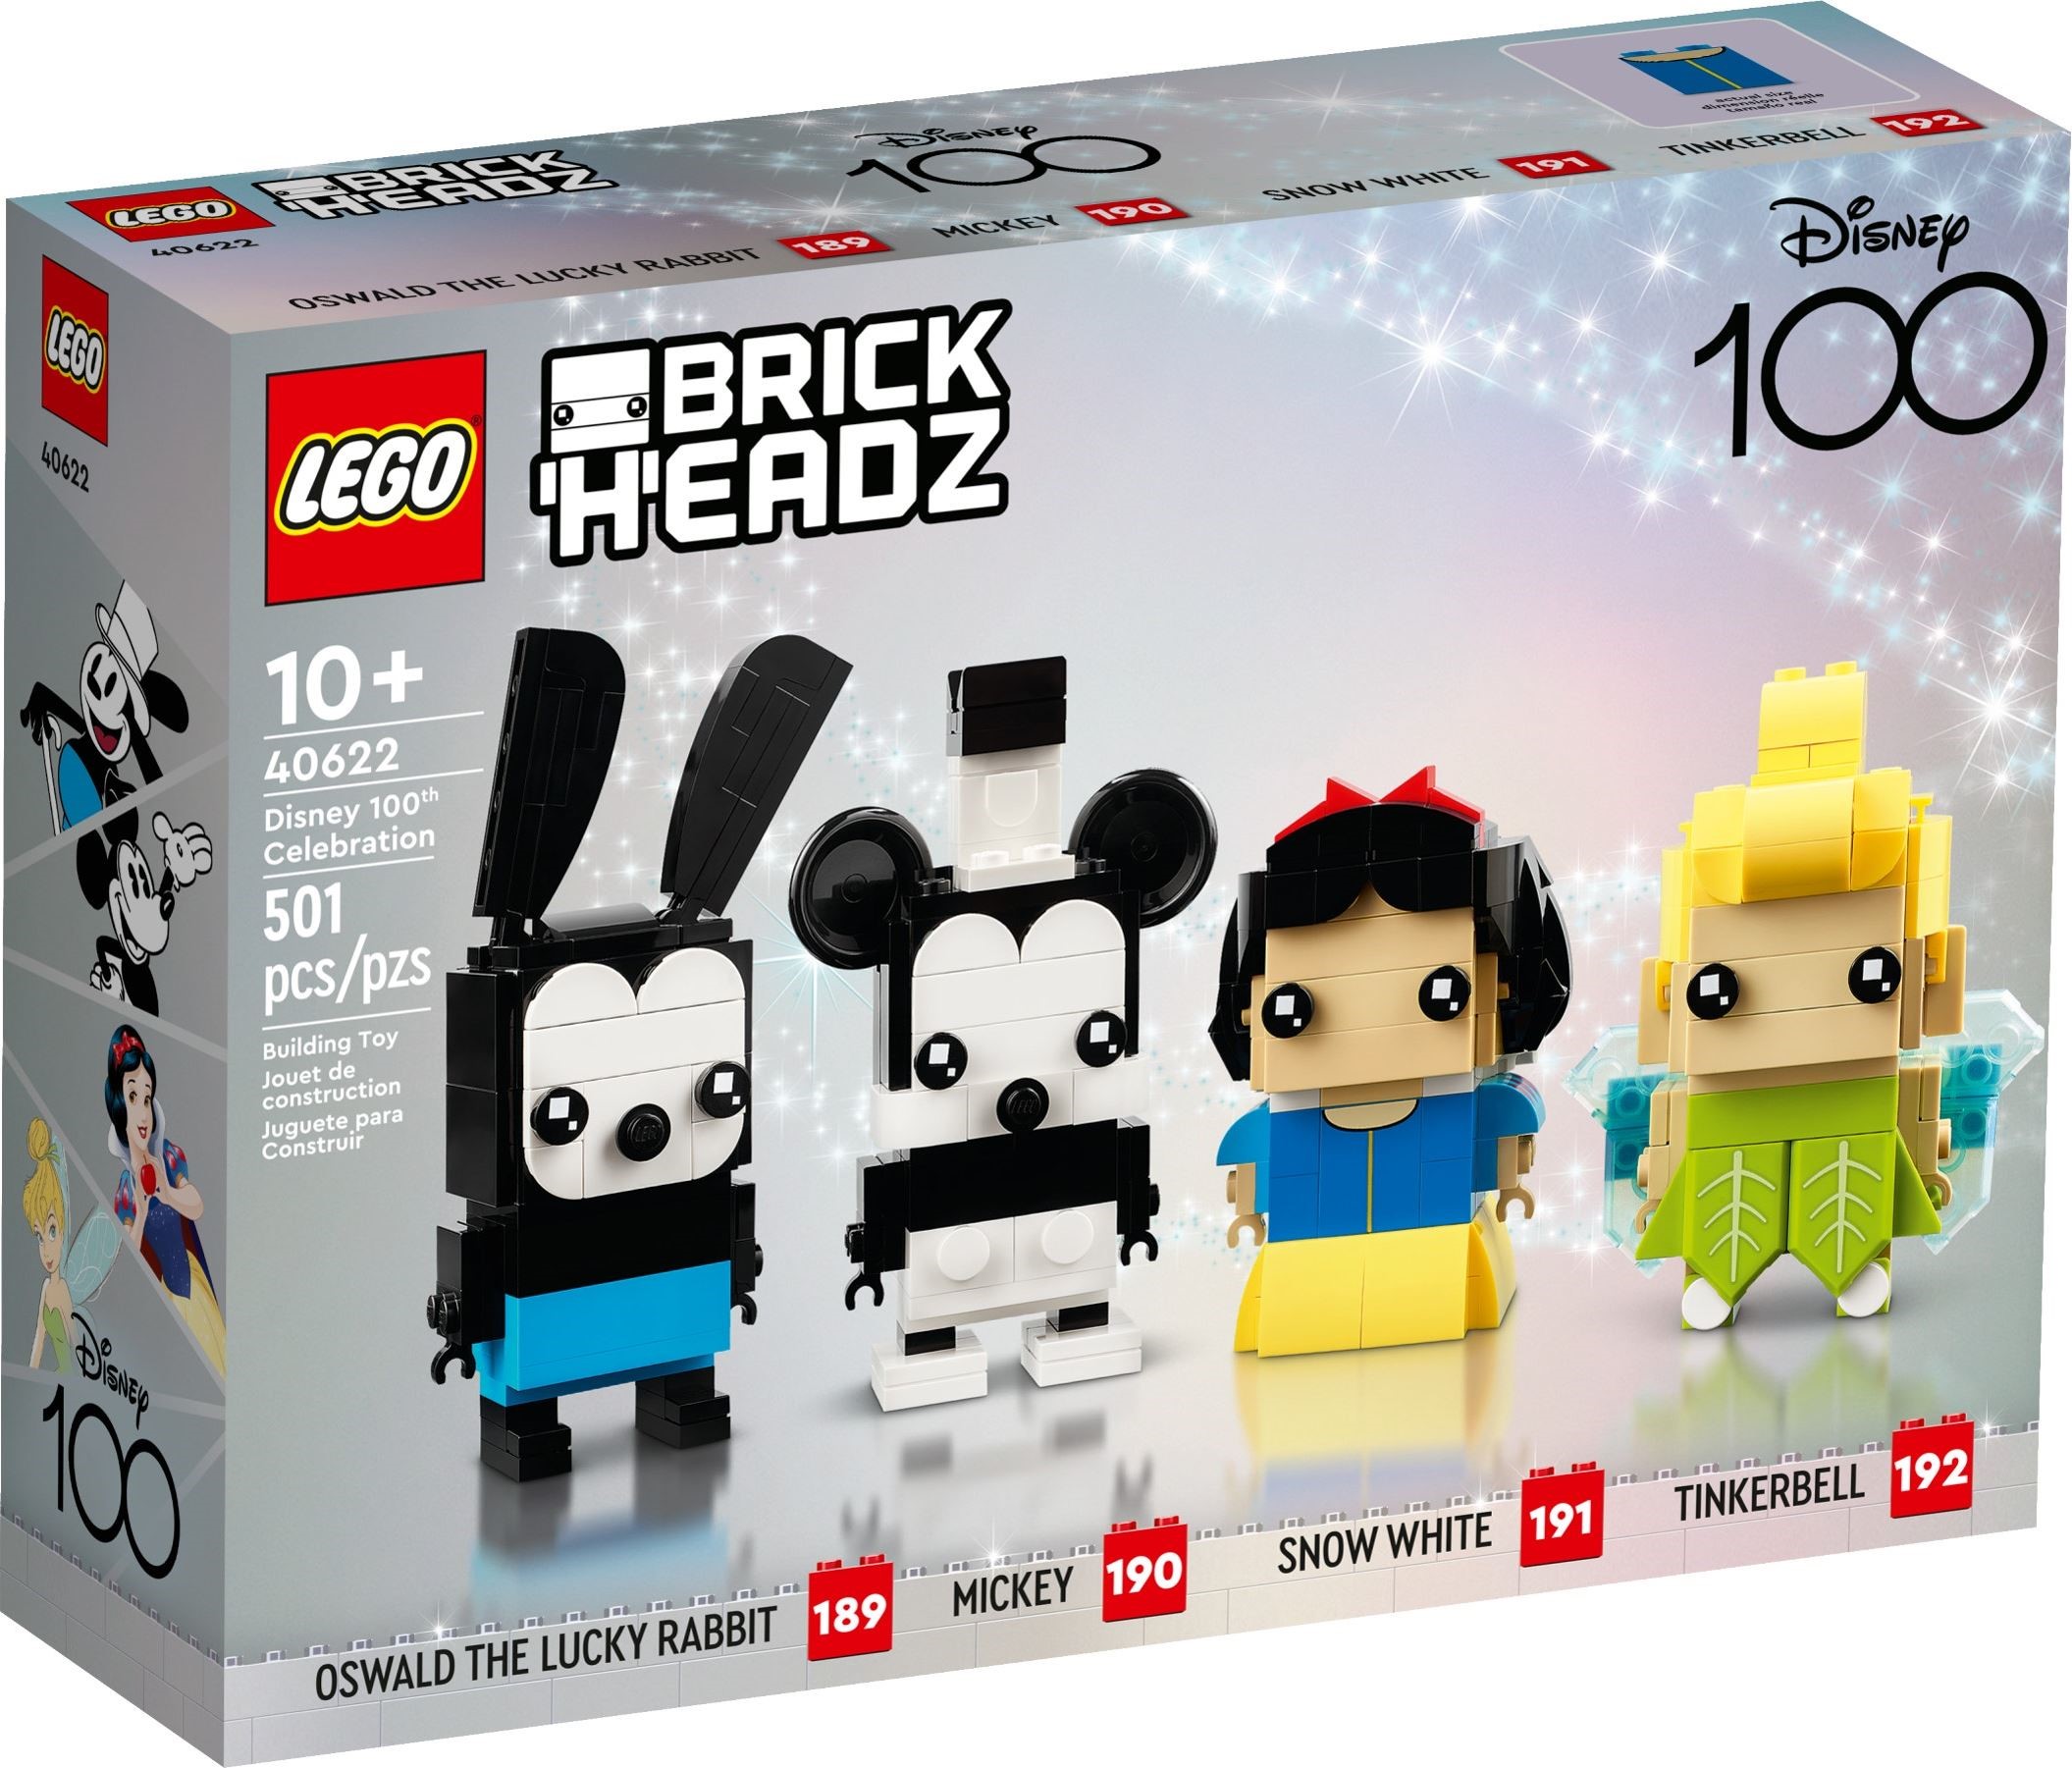 Disney Collectable Minifigures and more officially revealed!